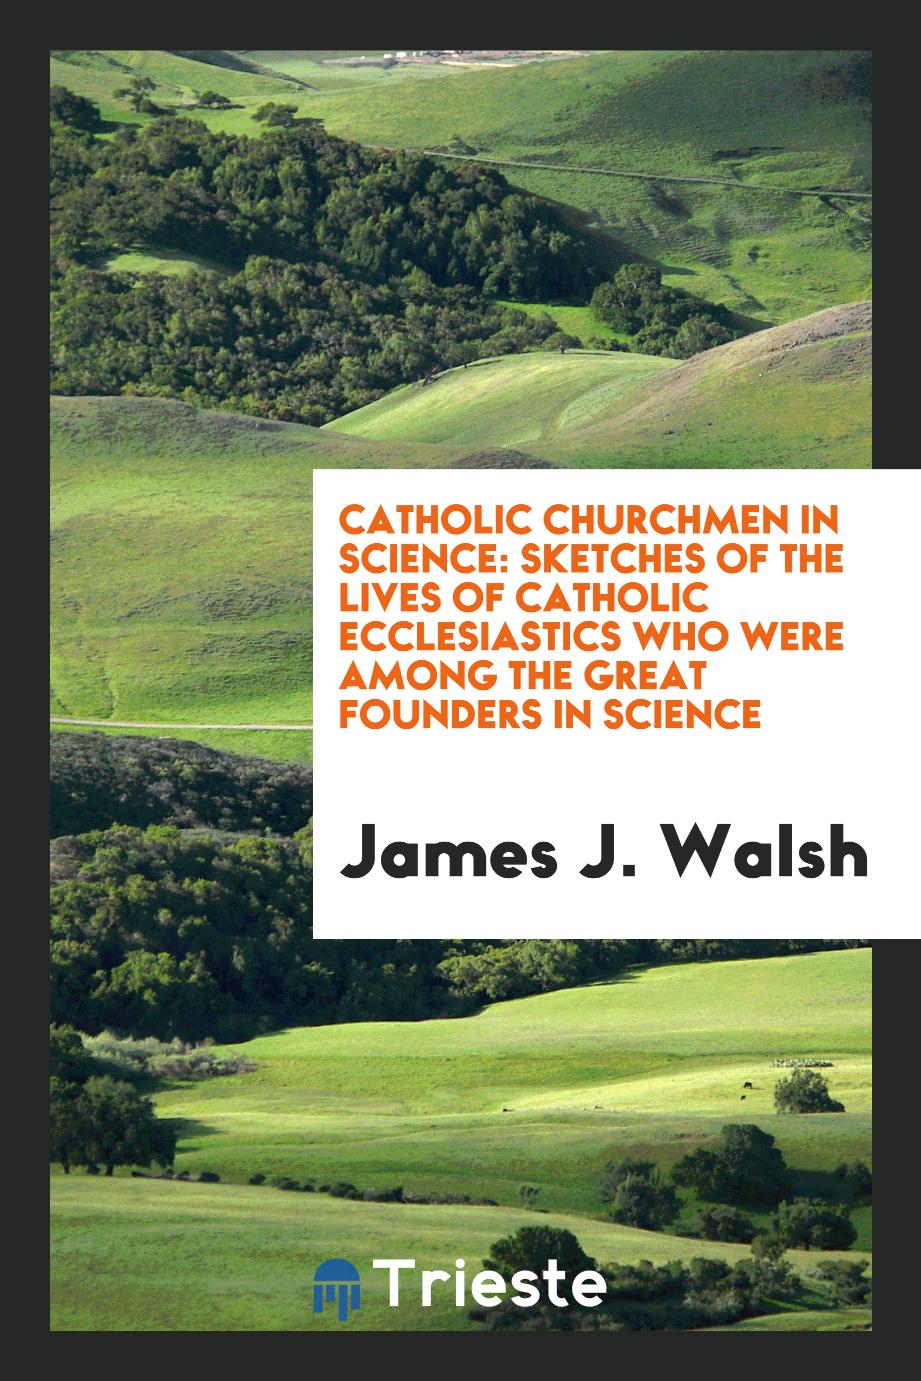 Catholic churchmen in science: sketches of the lives of Catholic ecclesiastics who were among the great founders in science